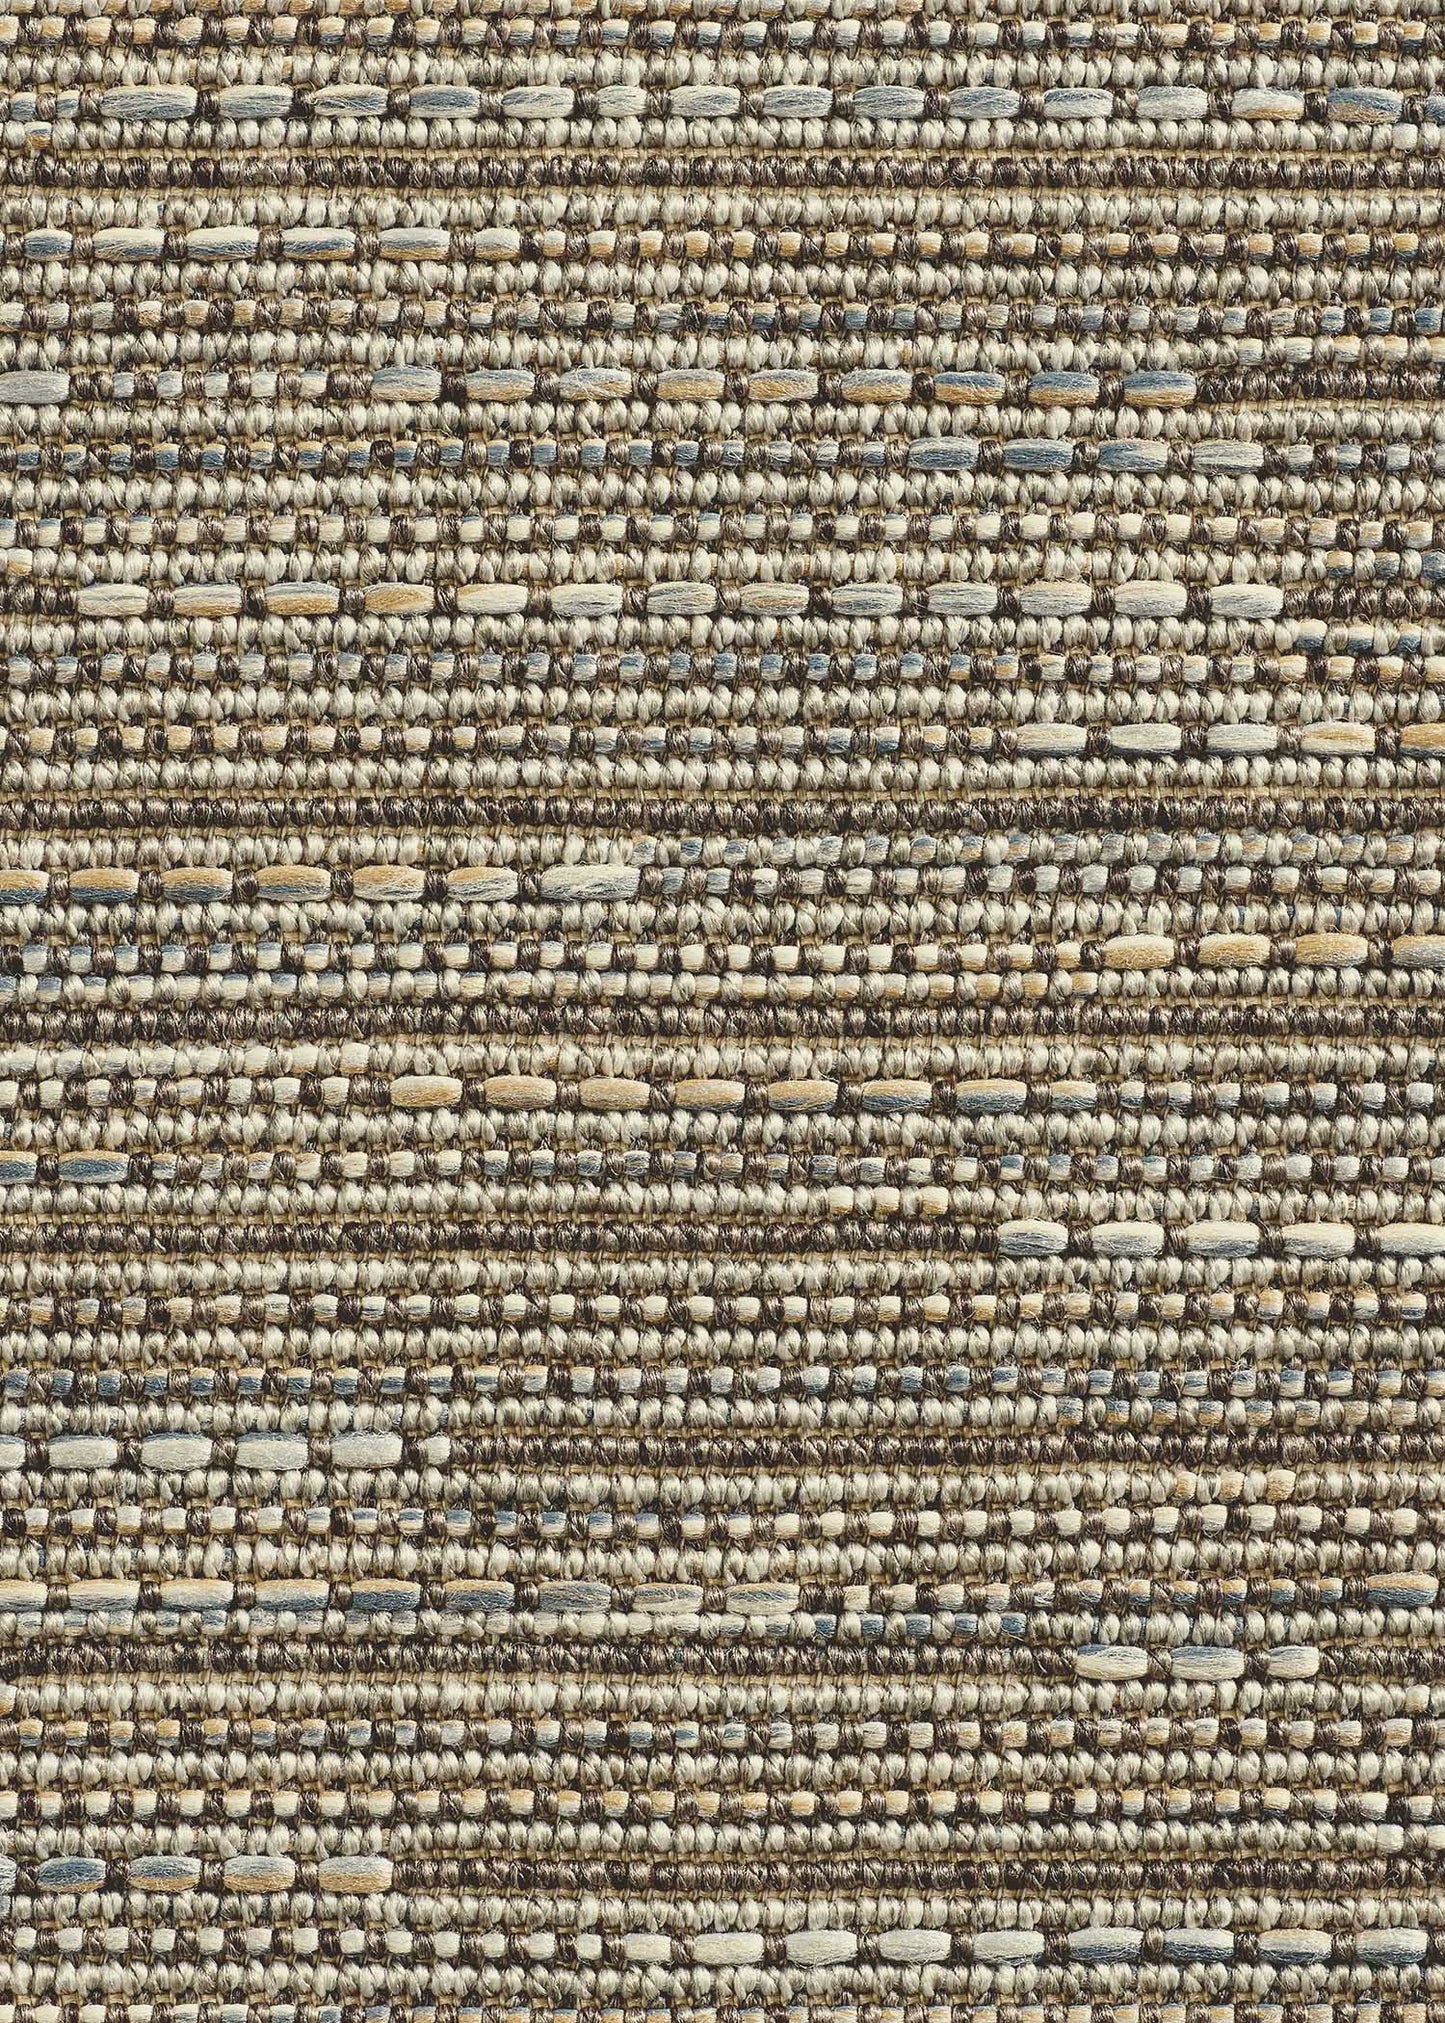 Stone Colors Outdoor Rug